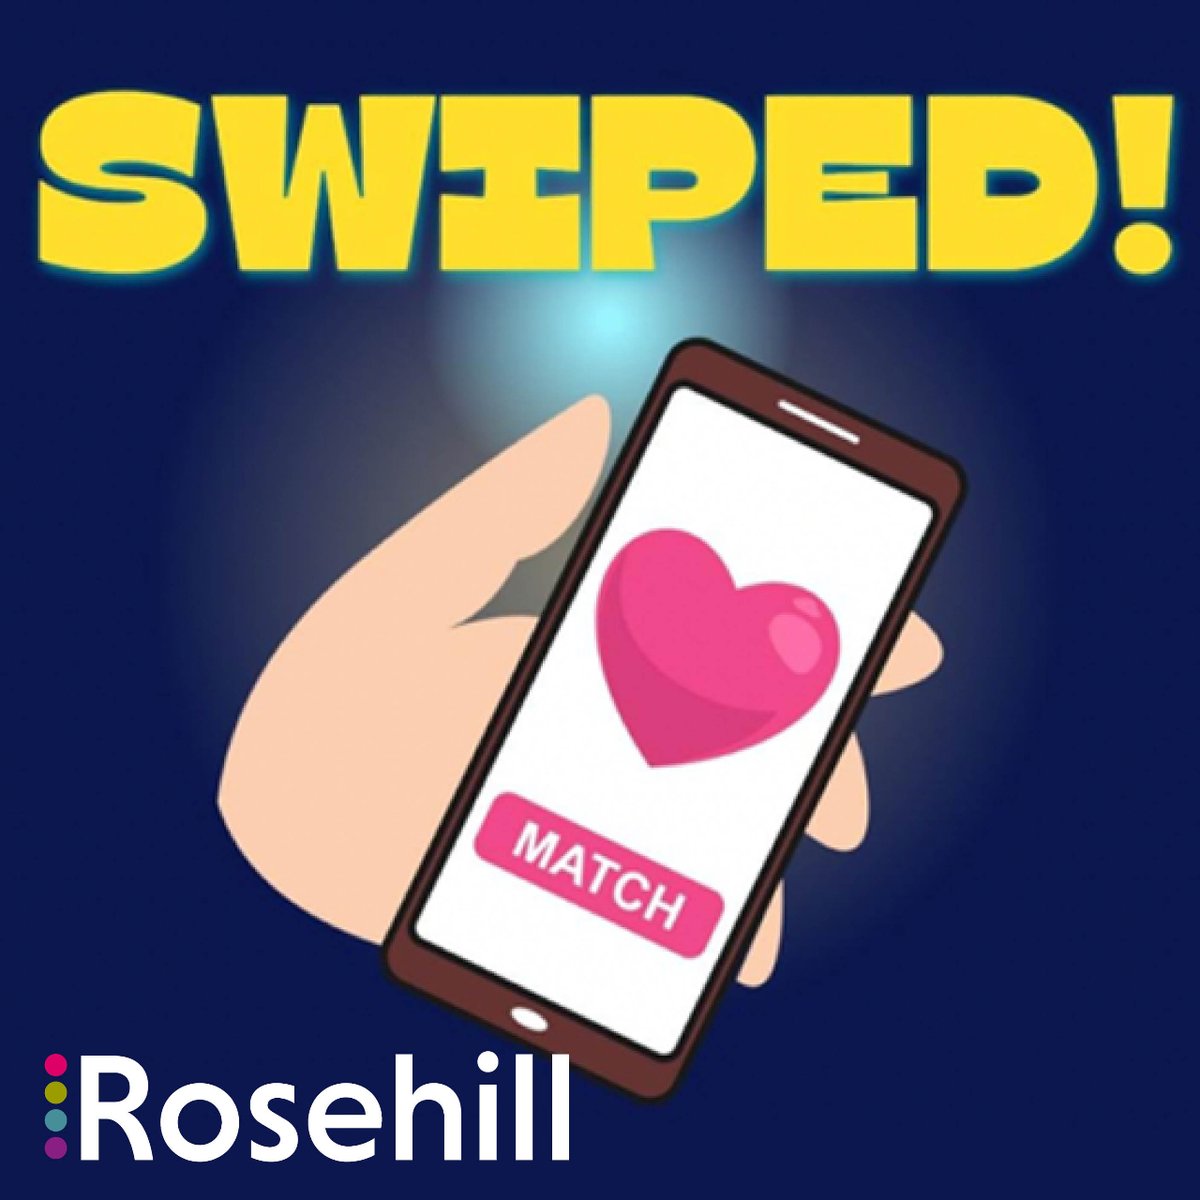 Wishing David and all the cast and crew the best of luck tomorrow as they kick off their production of Swiped! 🎭 You've all worked incredibly hard. Bravo and break a leg! 💫 Tickets are still available via the link below. #BreakALeg #Swiped #LocalTheatre rosehilltheatre.co.uk/whats-on/roseh…